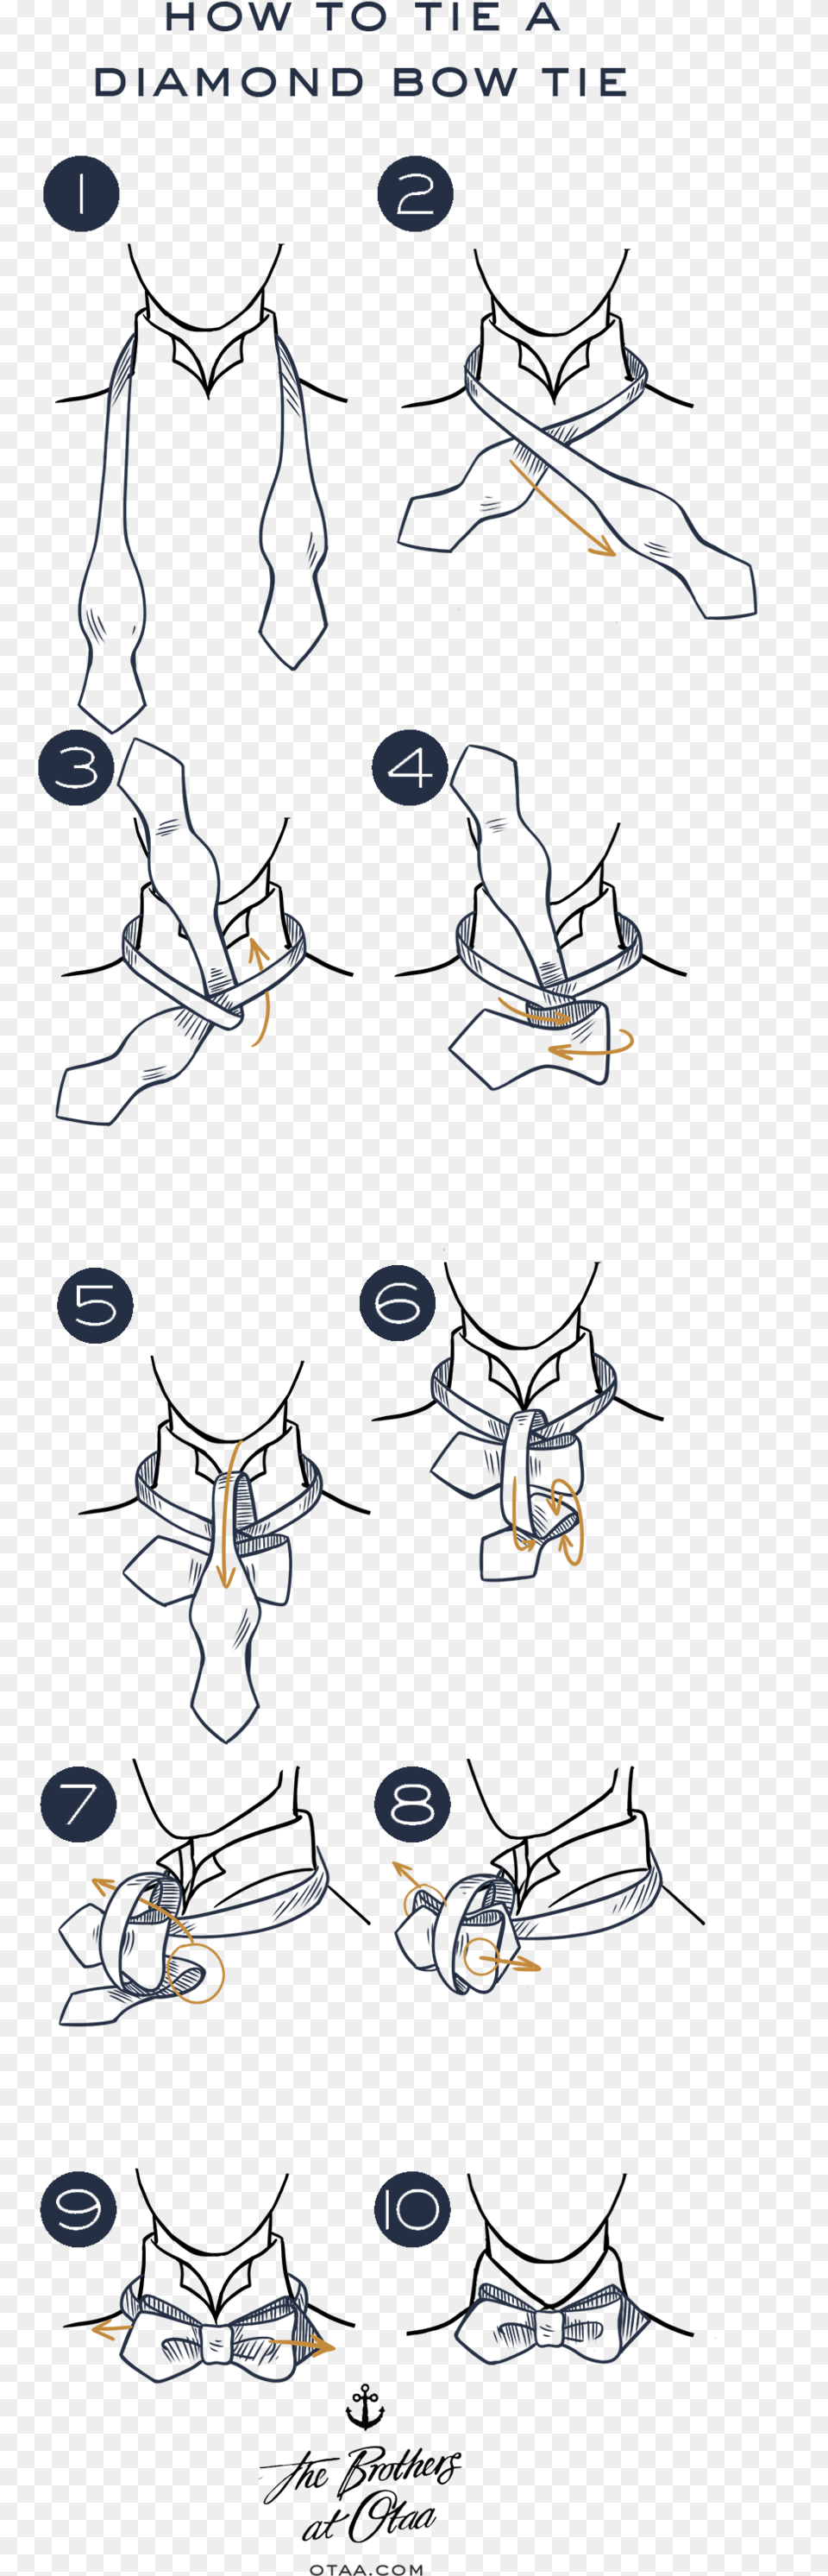 How To Tie A Diamond Bow Tie Cartoon Free Png Download